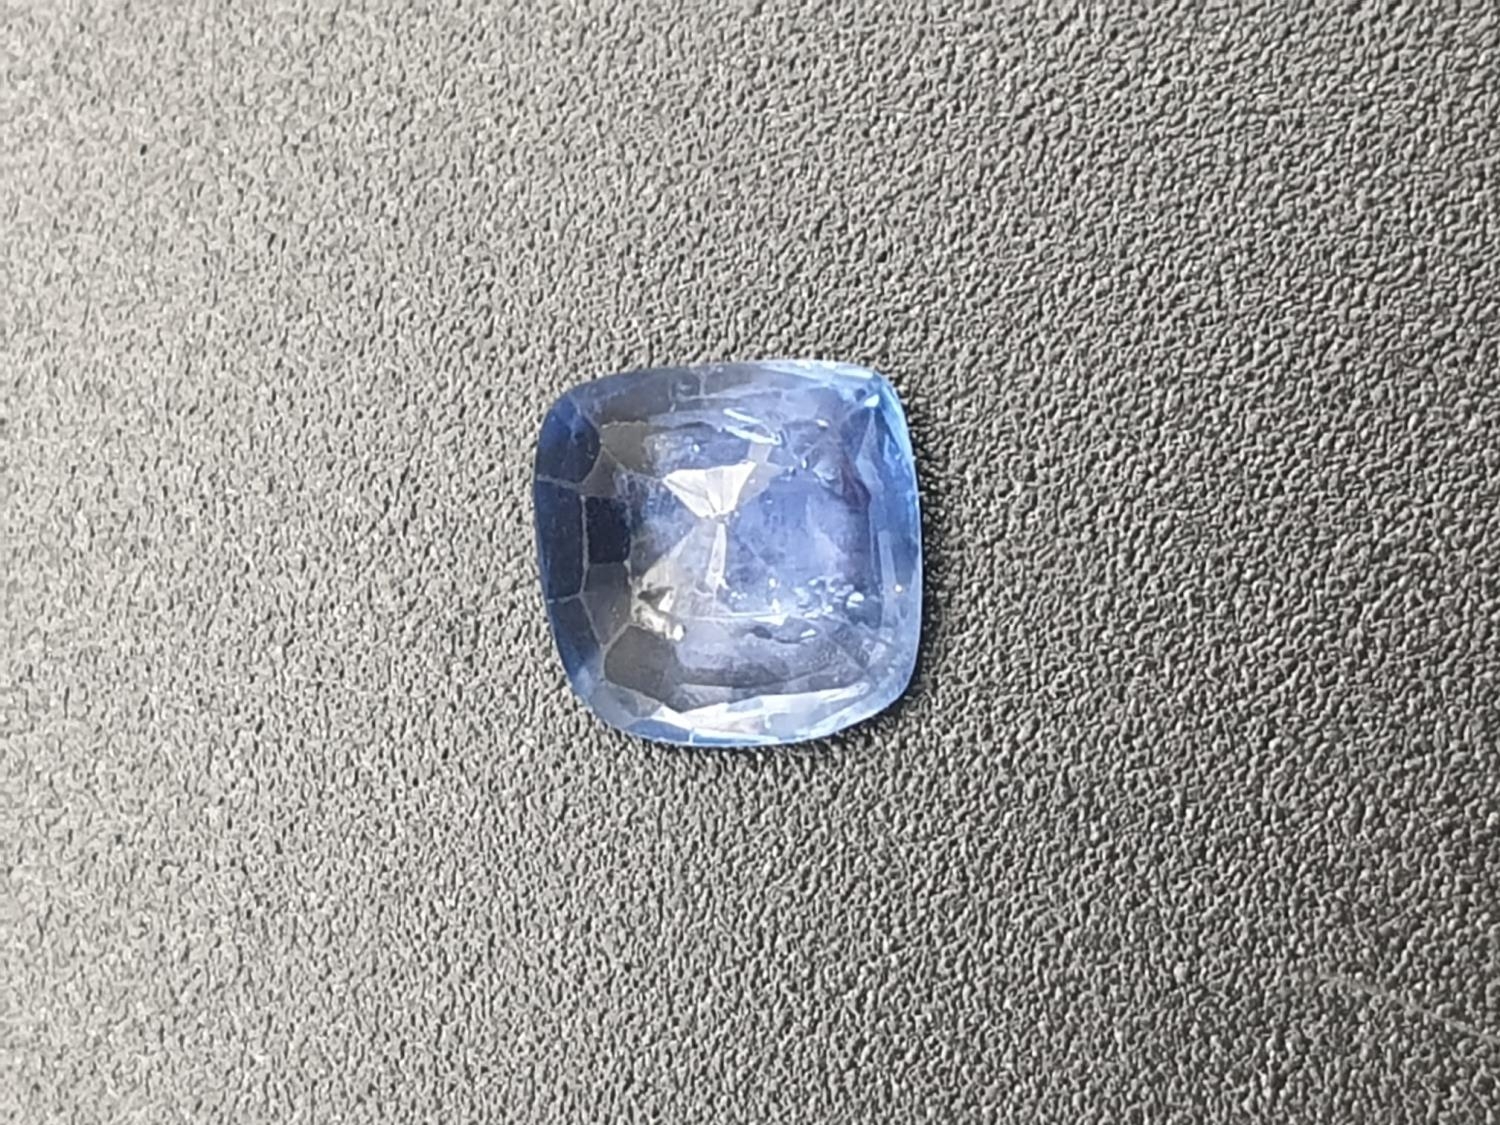 1.25ct cushion cut blue sapphire gemstone comes with original AnchorCert report and Safeguard - Image 2 of 5